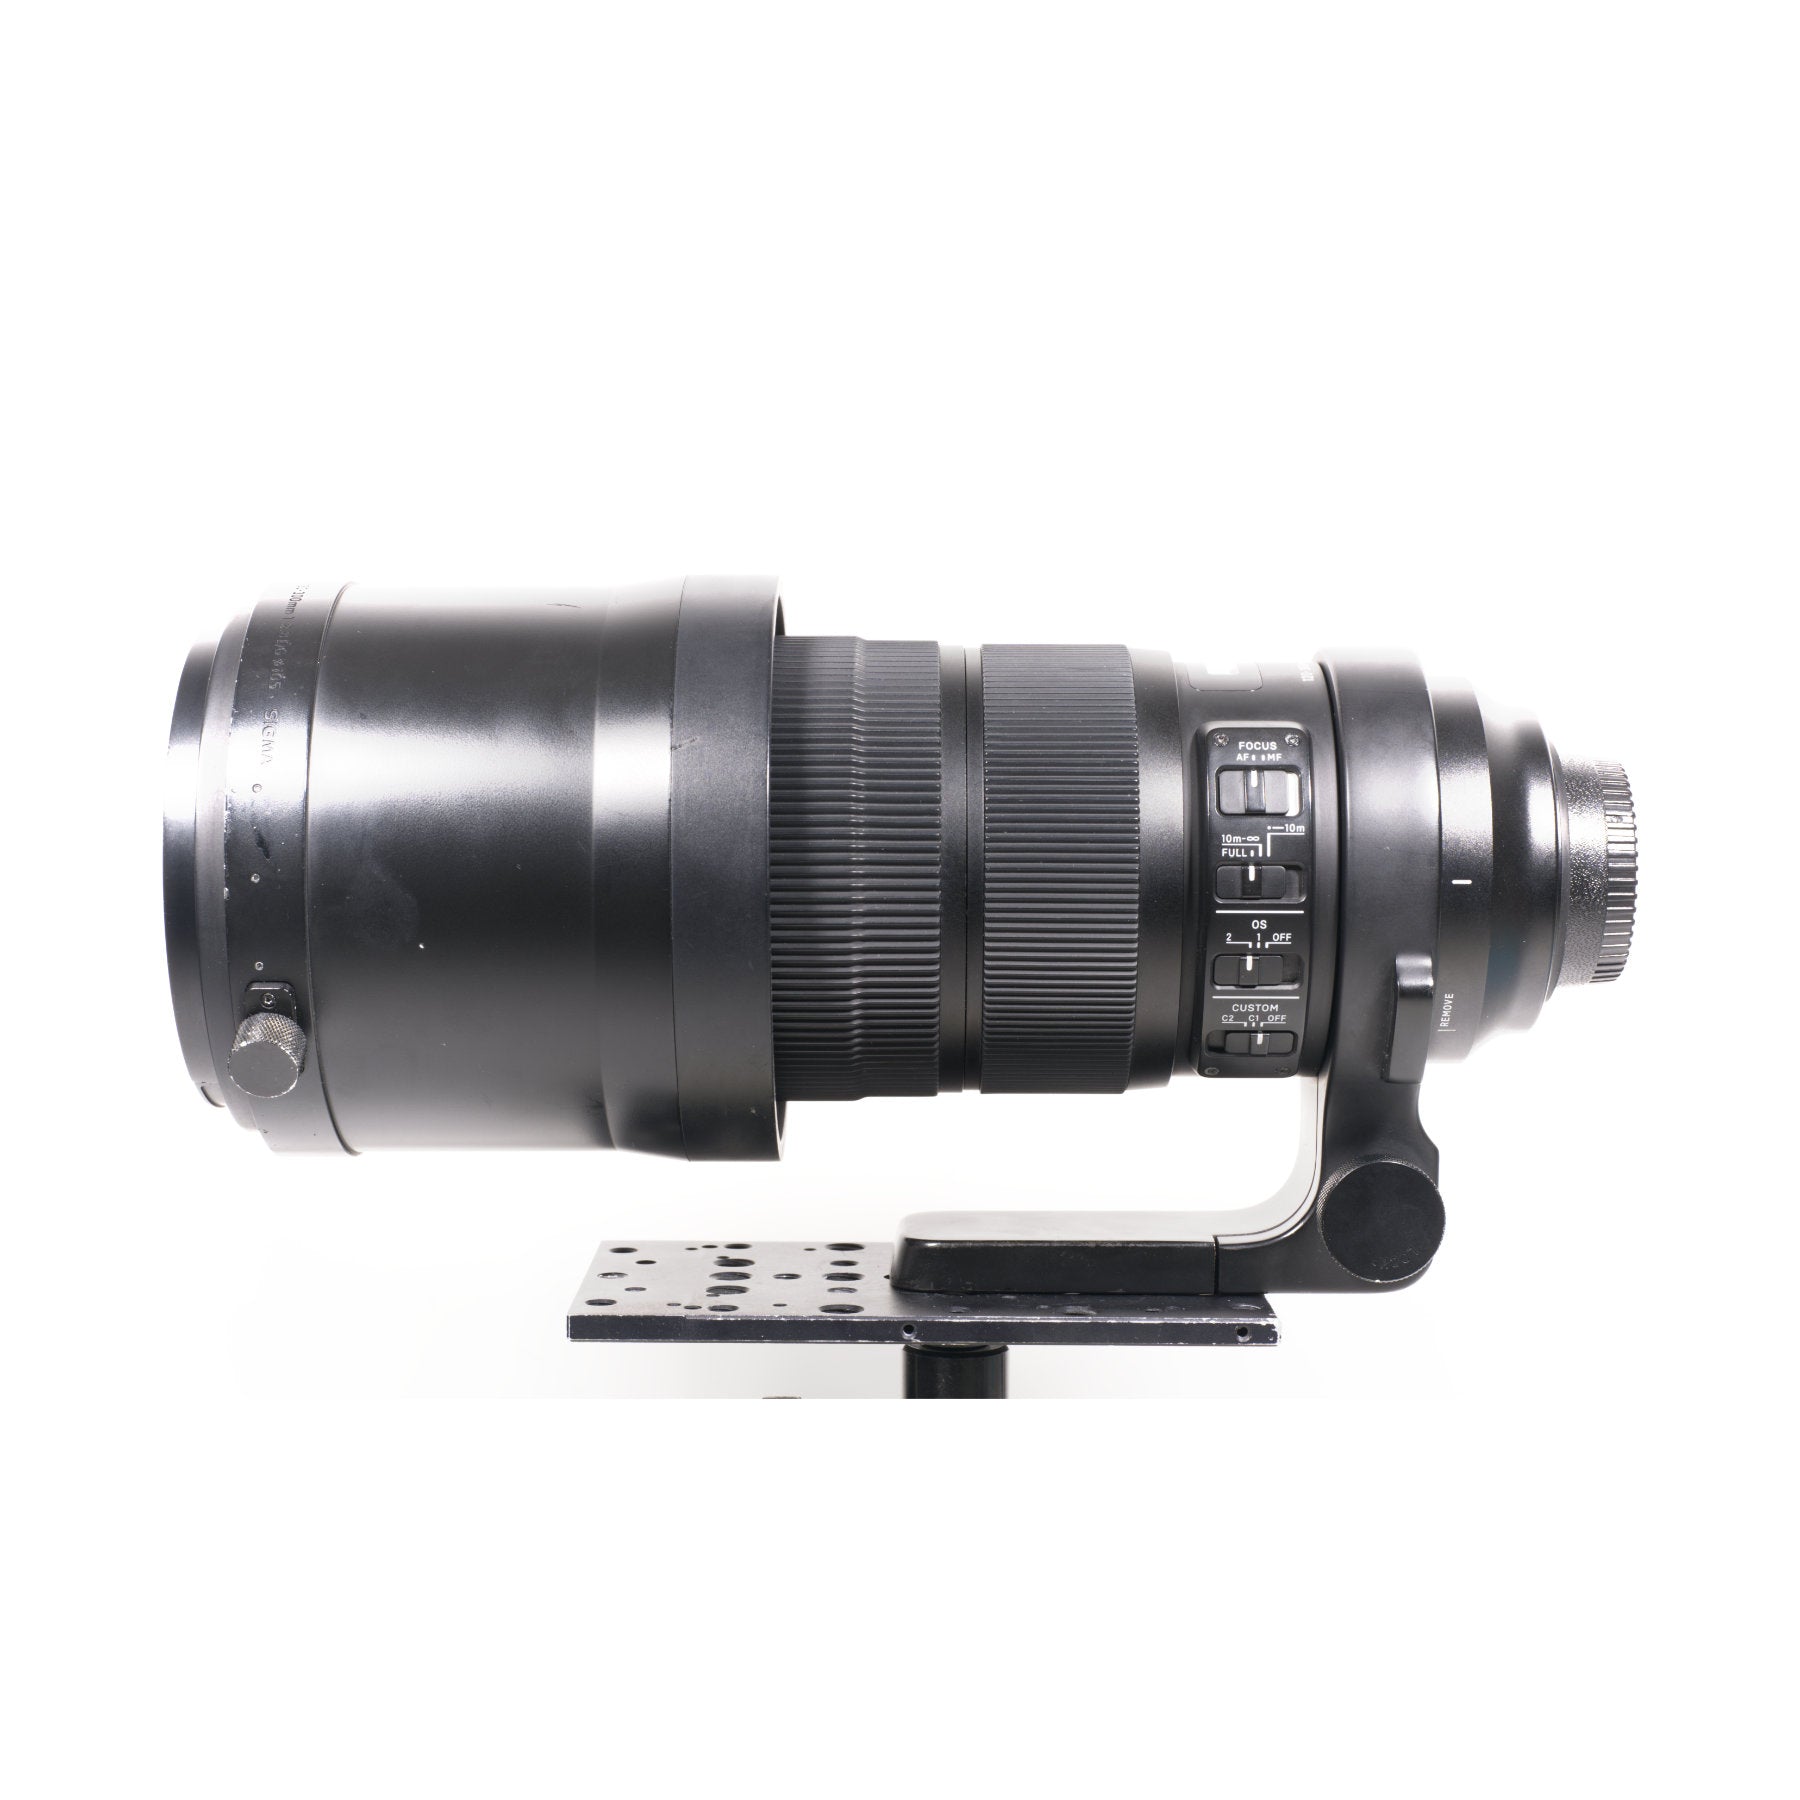 Buy Sigma 120-300mm f2.8 DG for Nikon F mount at Topic Store